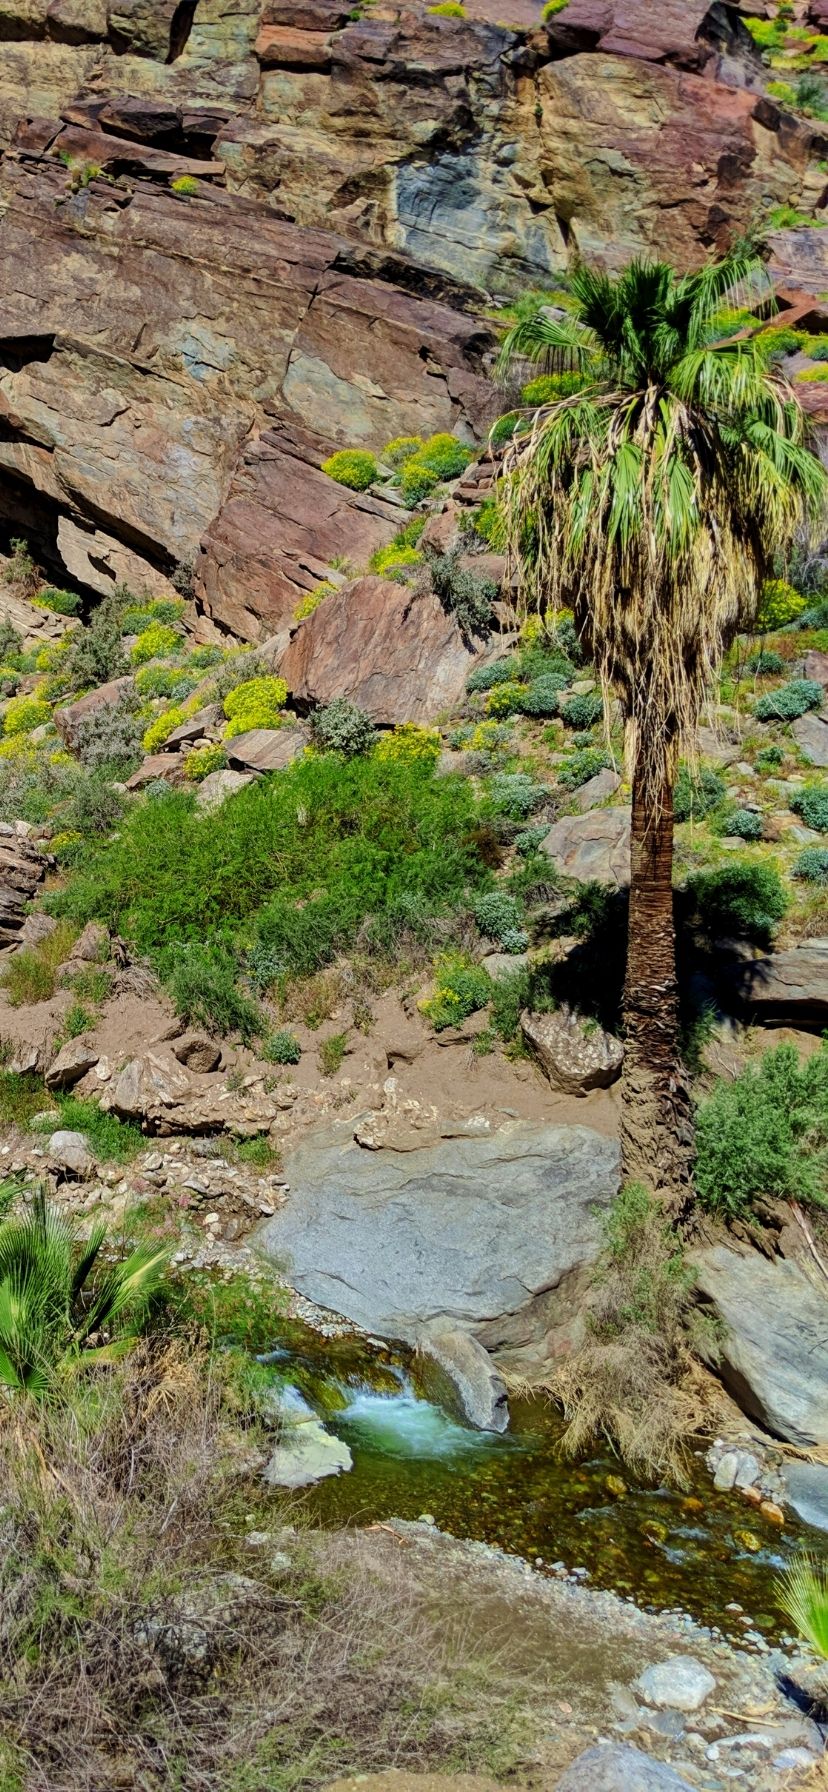 Andreas Canyon is a more difficult, but beautiful hike in Palm Springs, complete with rushing stream and wildflowers